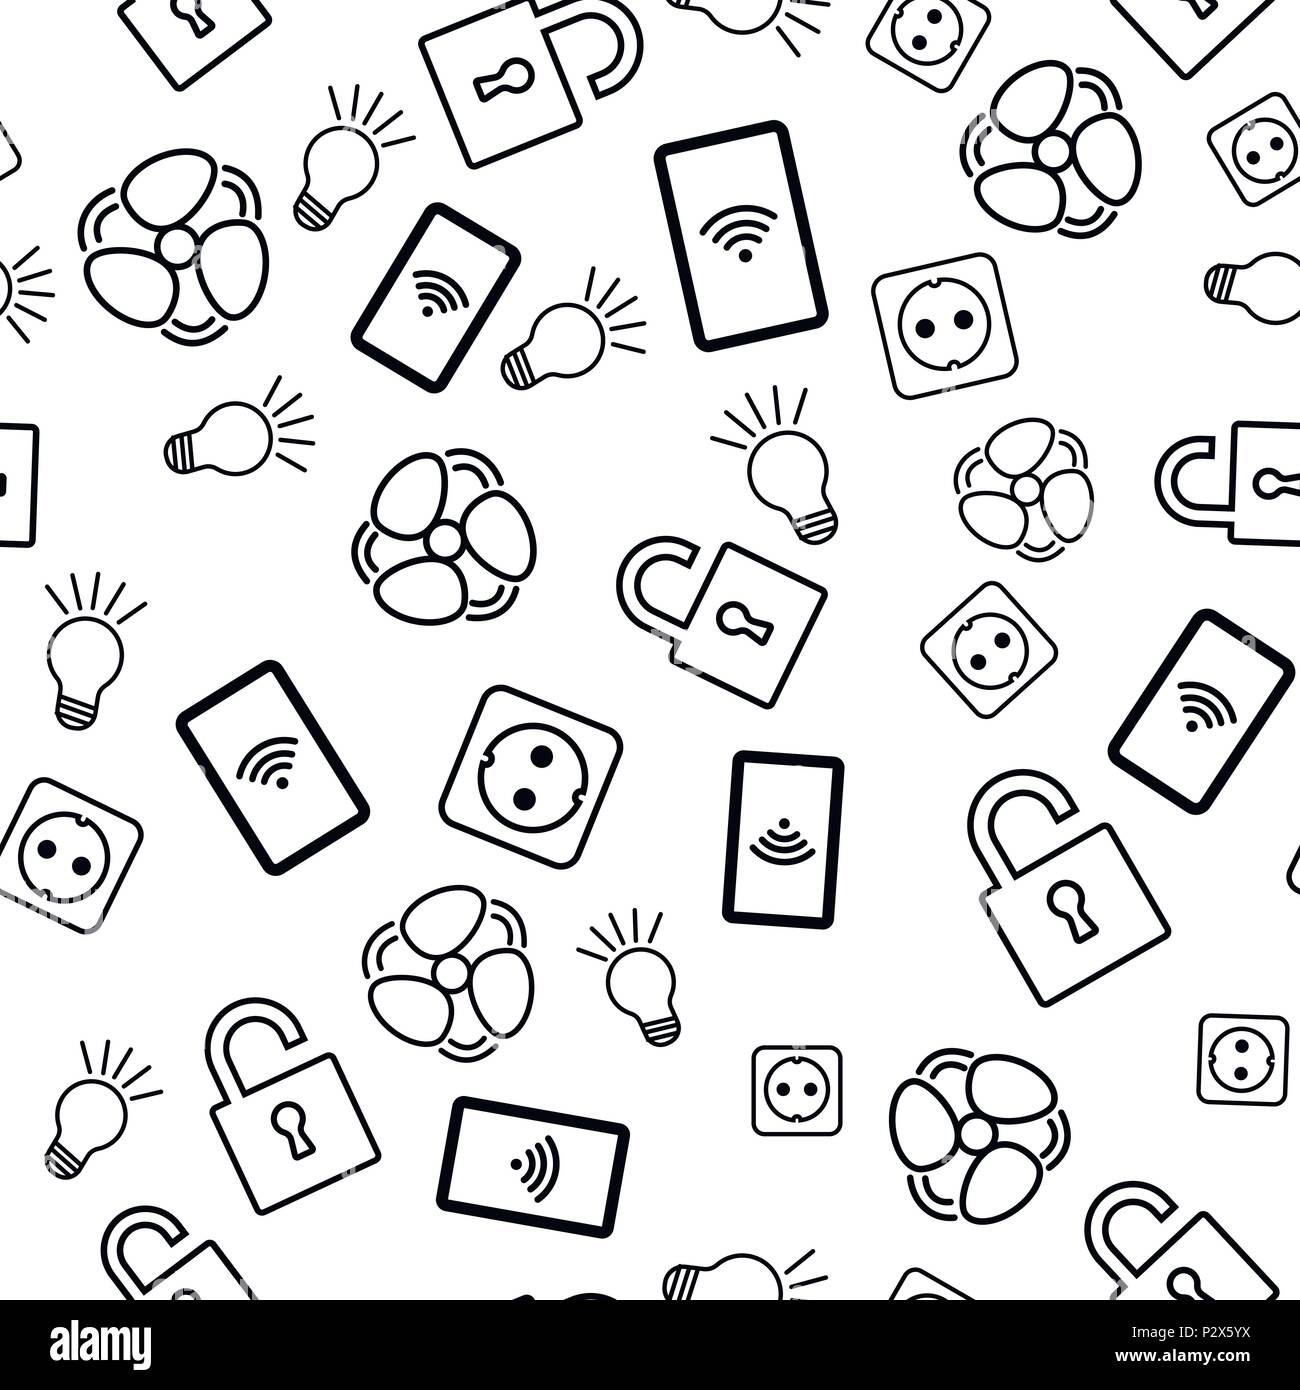 Seamless pattern with icons on white background Stock Vector